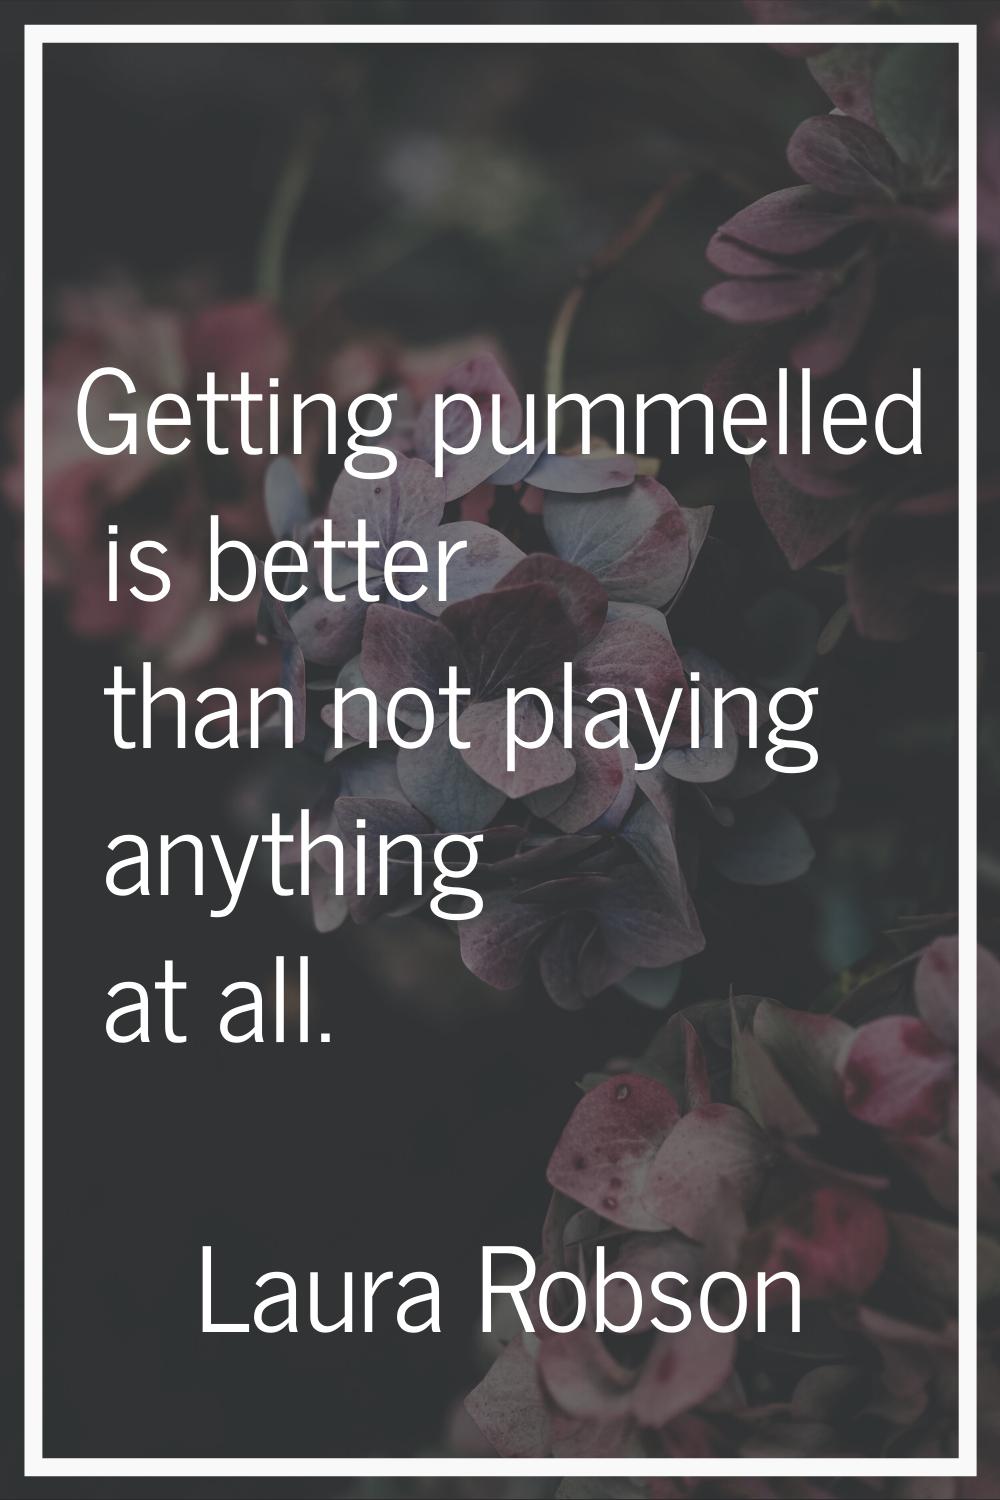 Getting pummelled is better than not playing anything at all.